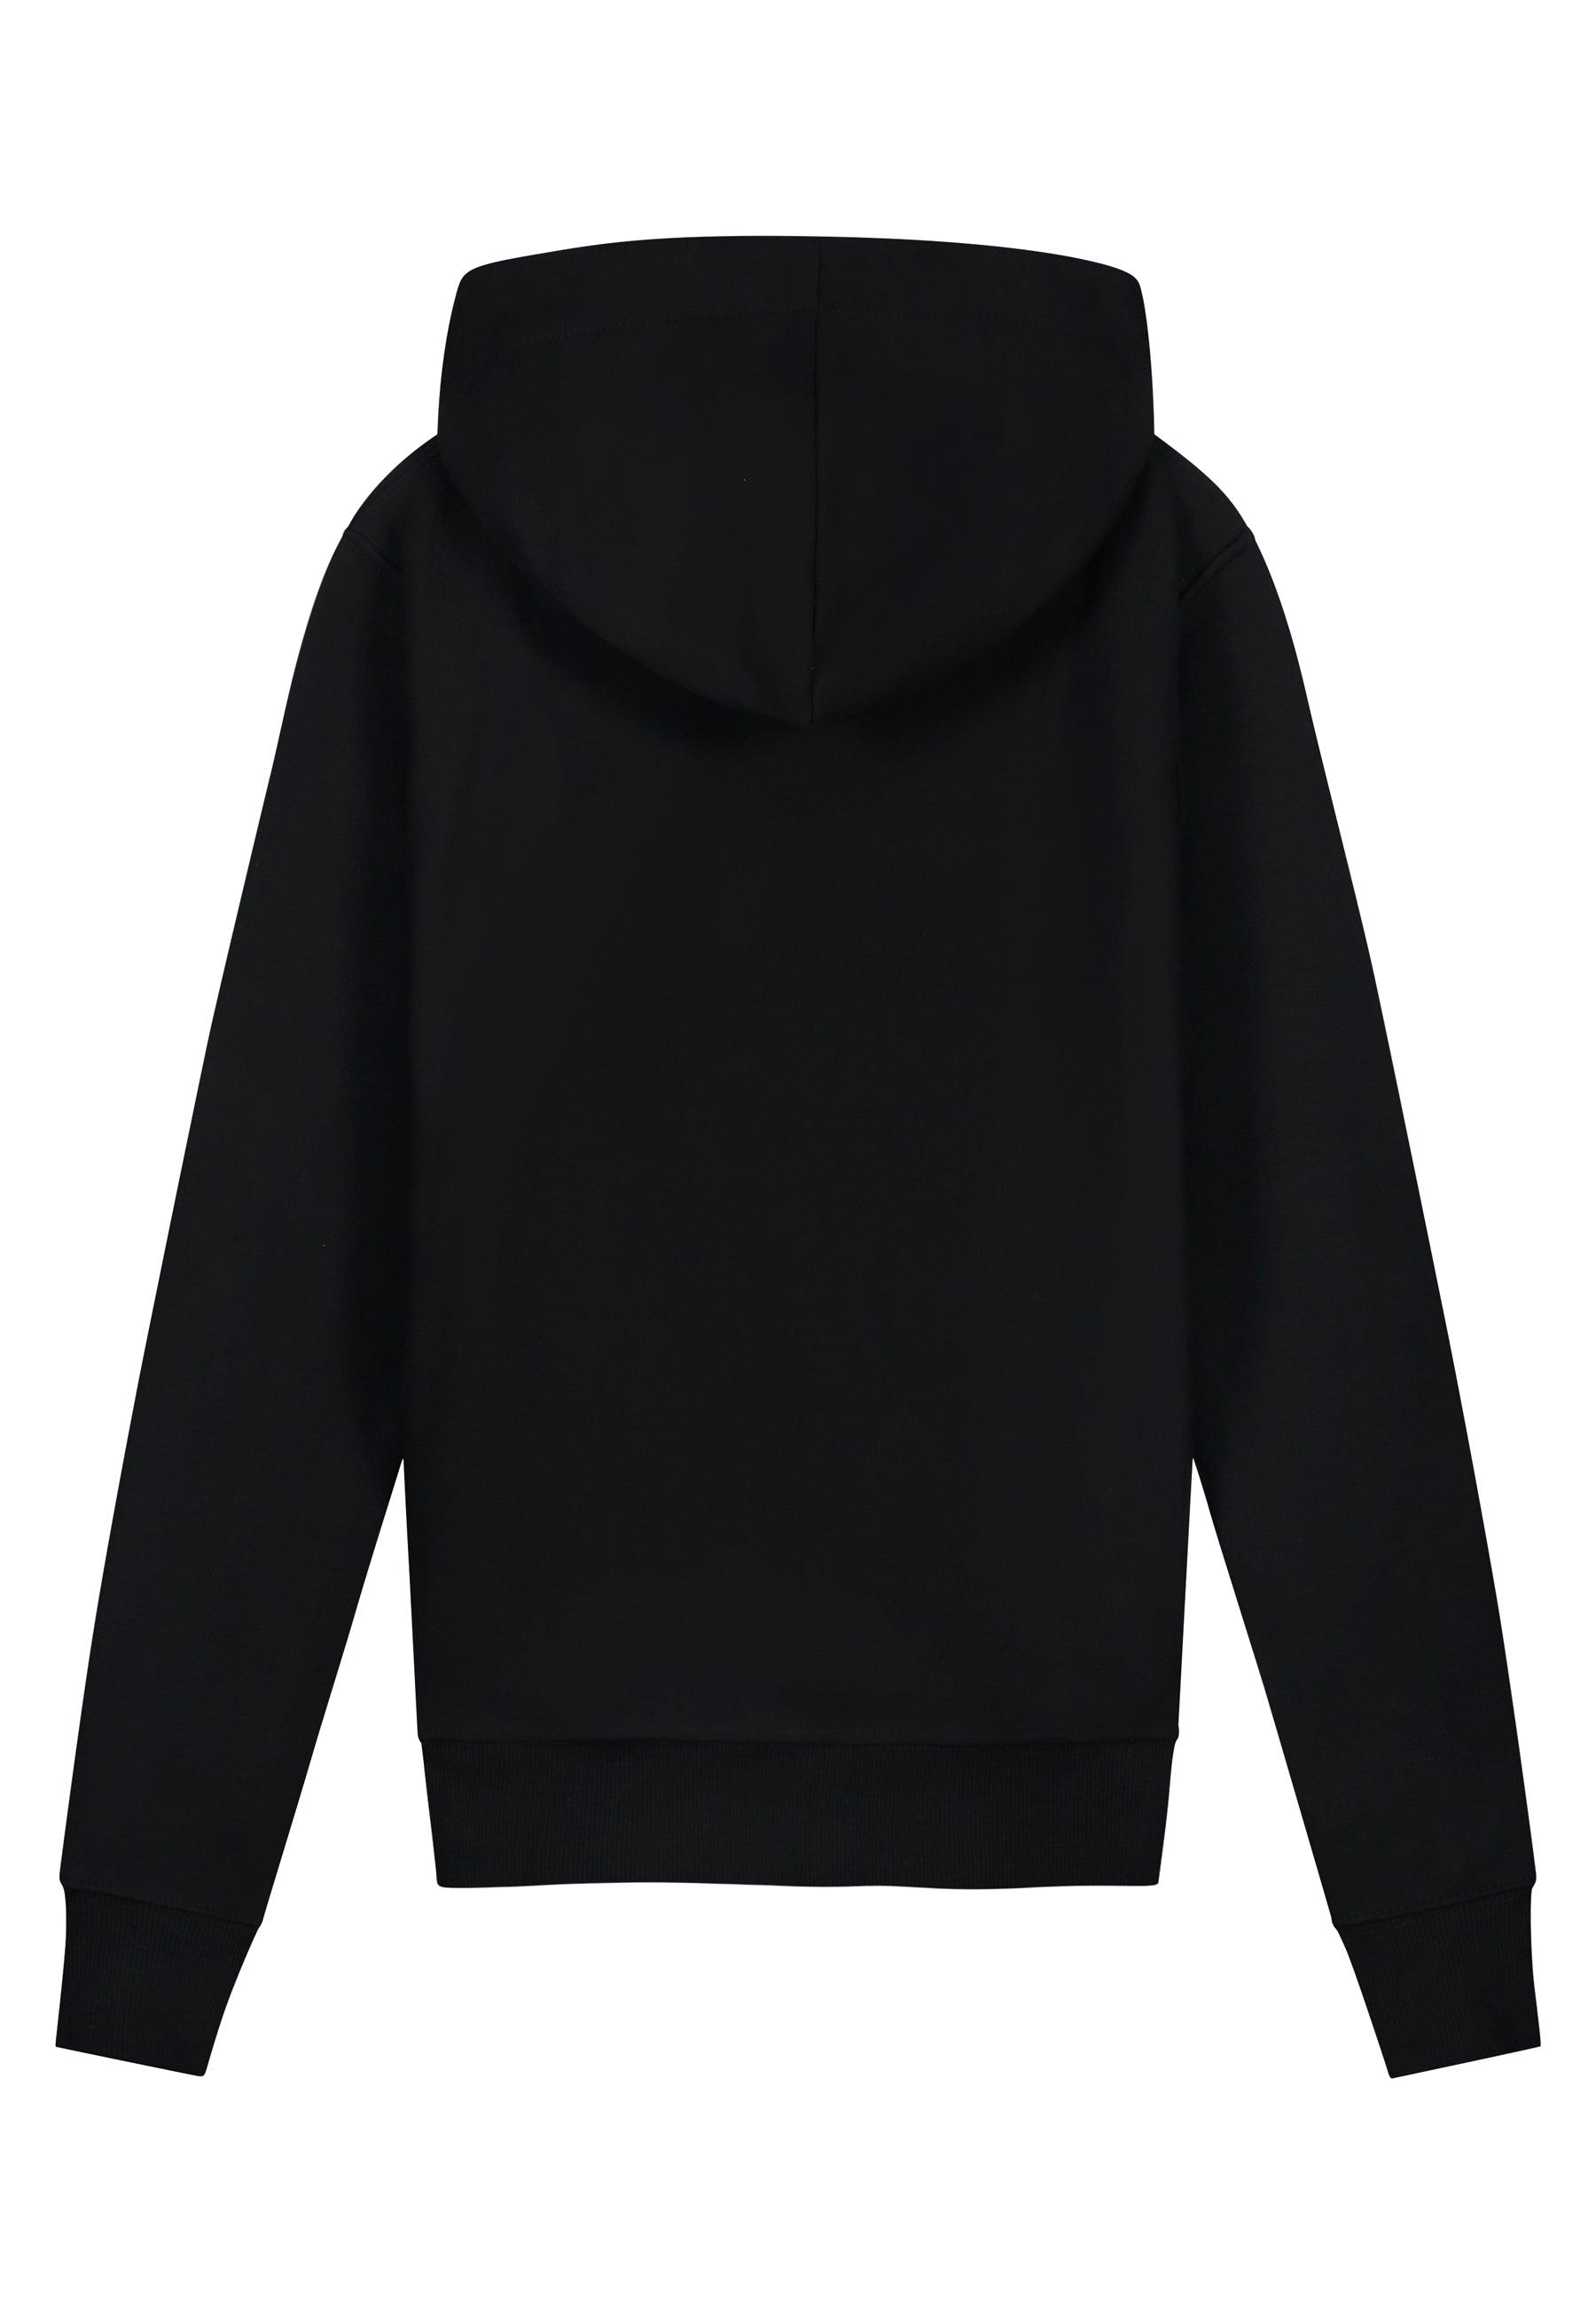 Black hoodie Amsterdam – The Artwork Collect Label